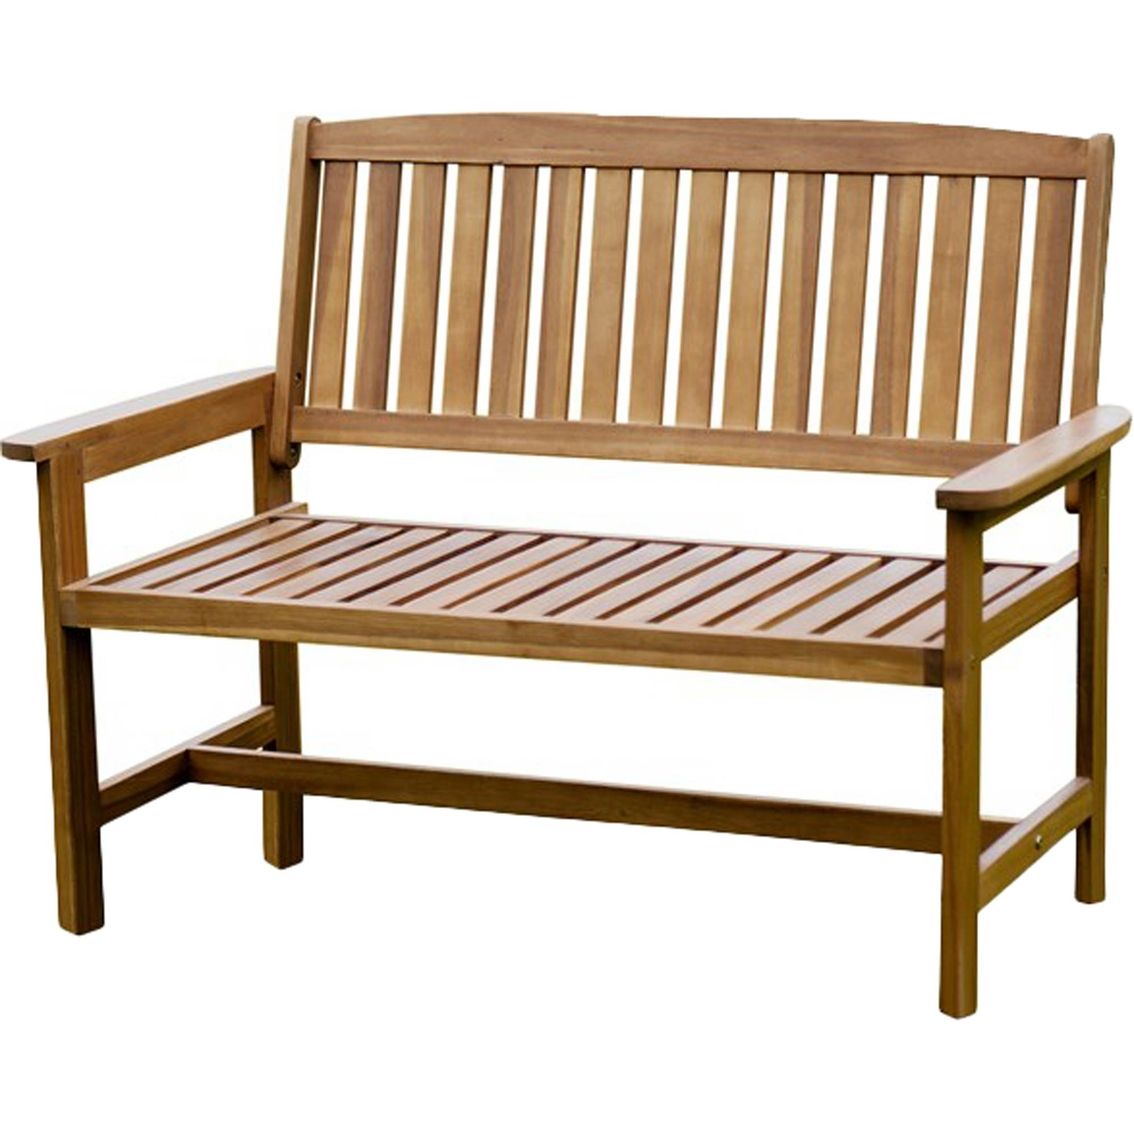 Hrh Designs 4 Ft. Wooden Garden Bench | Benches | More Pertaining To Wood Garden Benches (Photo 19 of 25)